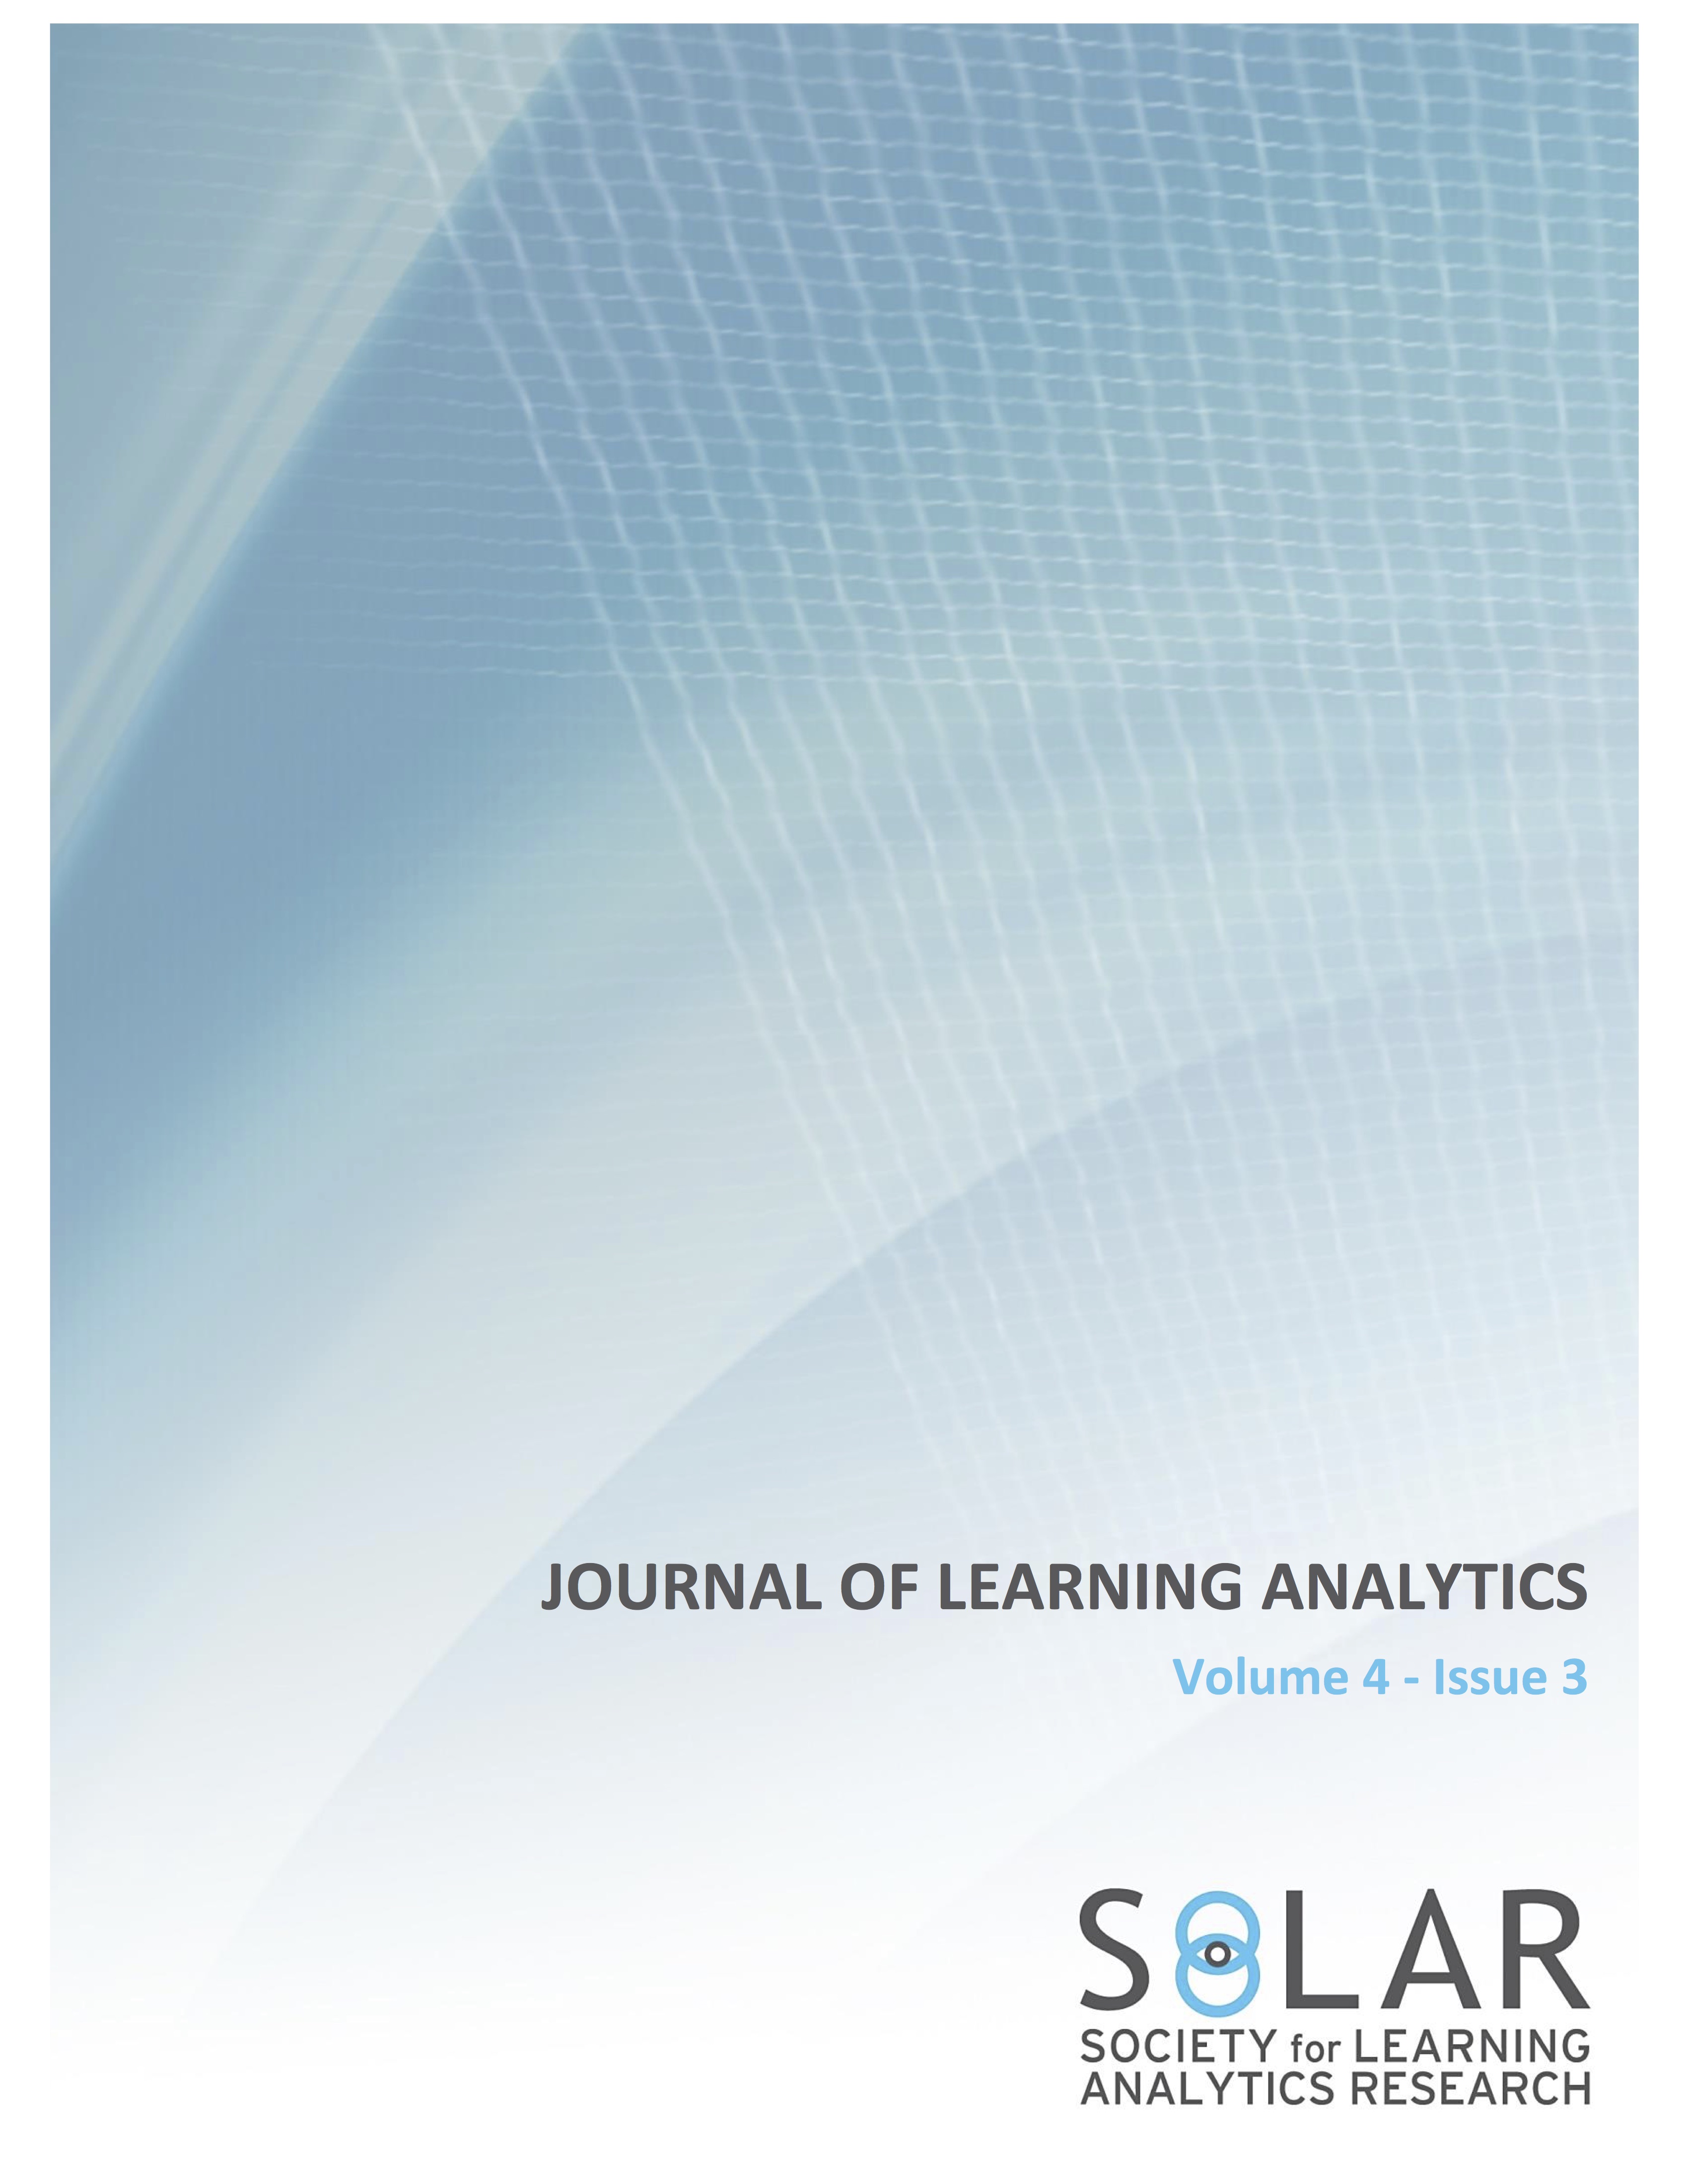 Special Section on Learning Analytics Tools and Datasets, Journal of Learning Analytics